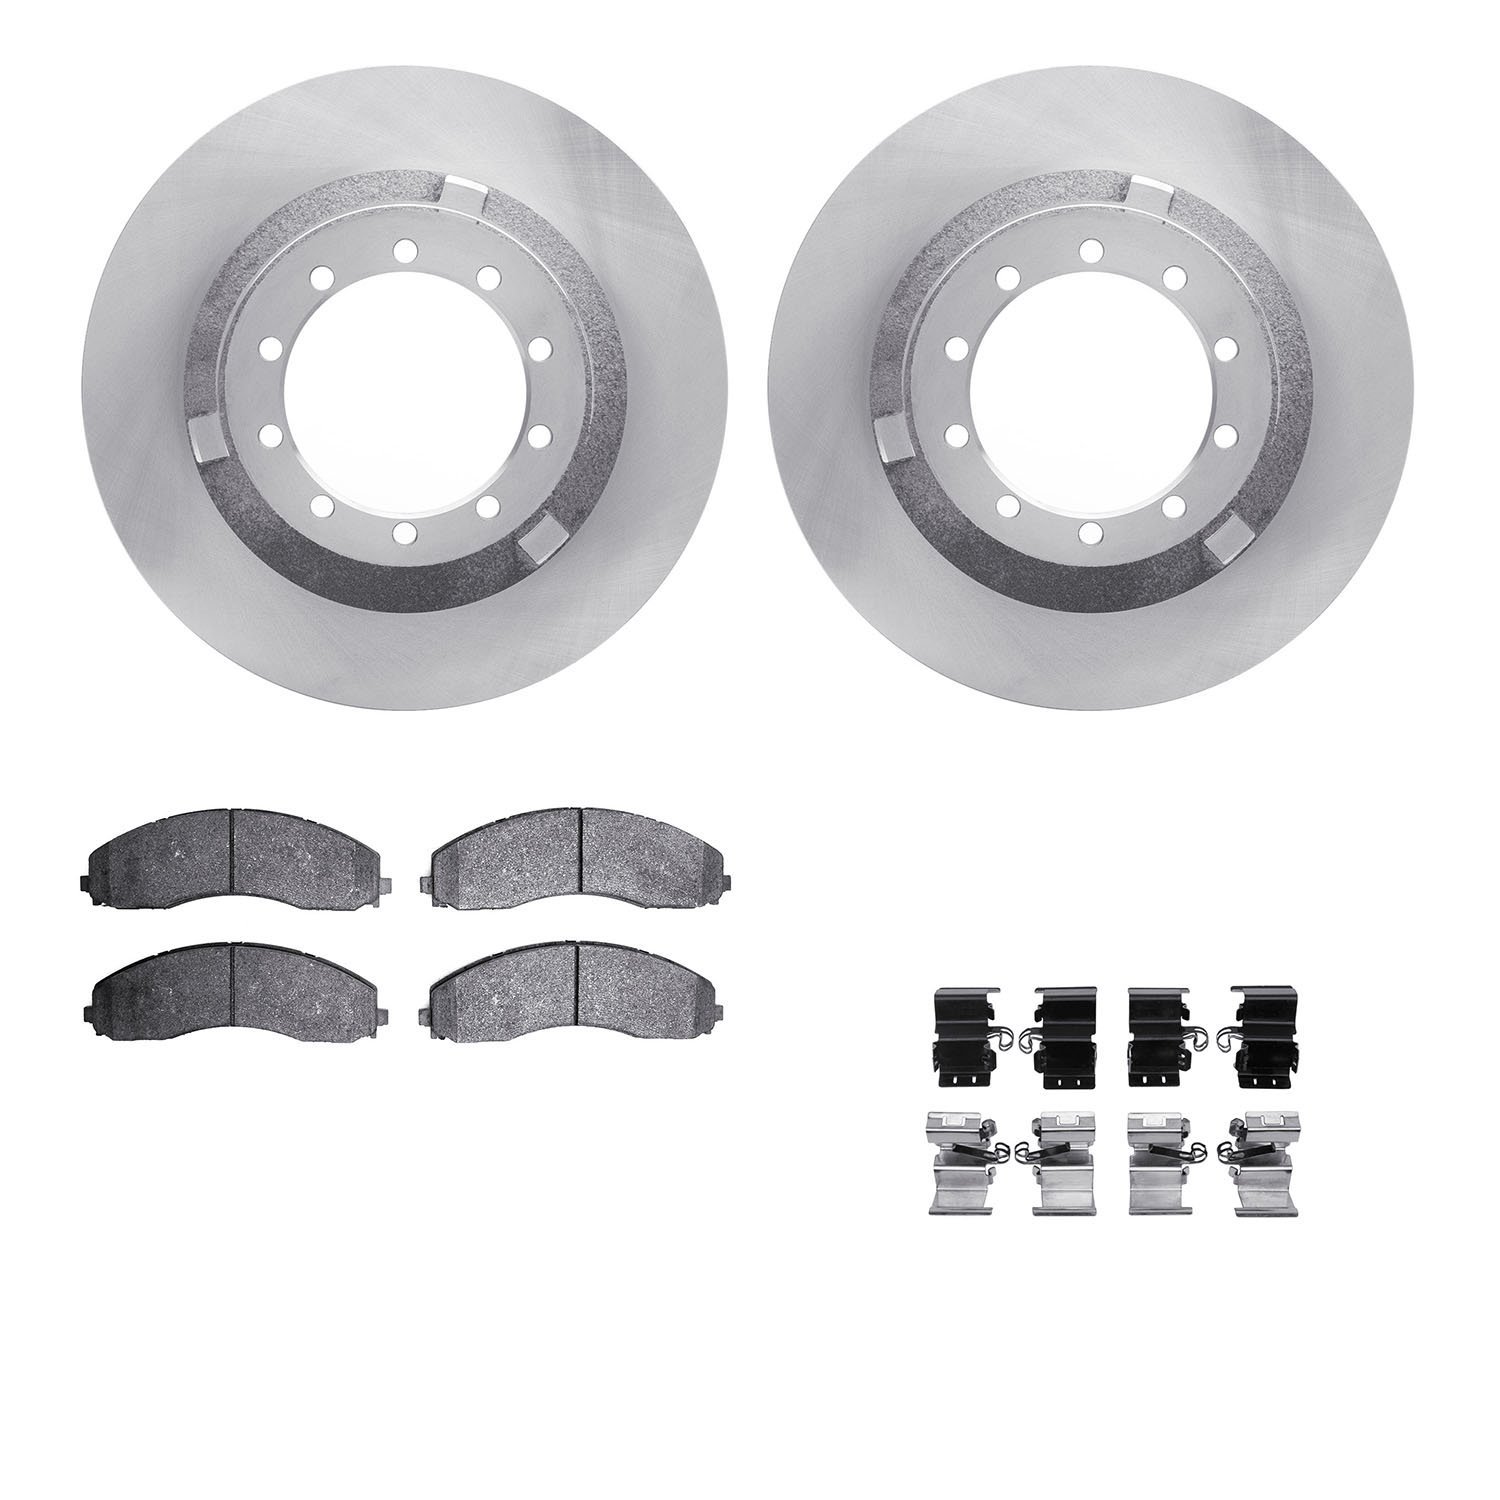 6412-54332 Brake Rotors with Ultimate-Duty Brake Pads Kit & Hardware, Fits Select Ford/Lincoln/Mercury/Mazda, Position: Rear